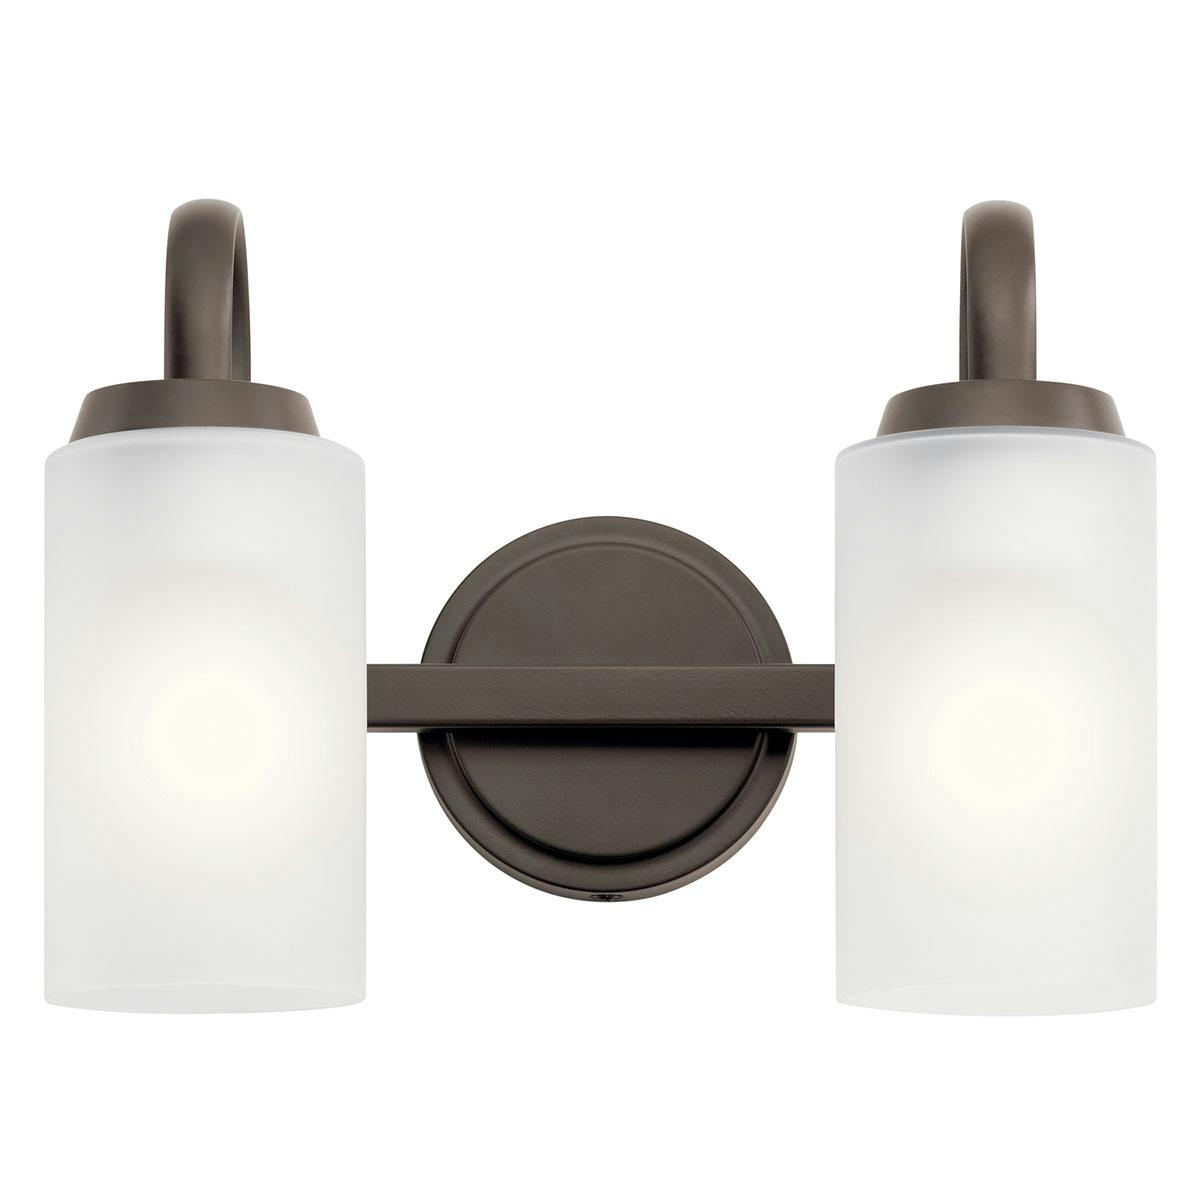 Front view of the Kennewick 2 Light Bath Light Olde Bronze on a white background